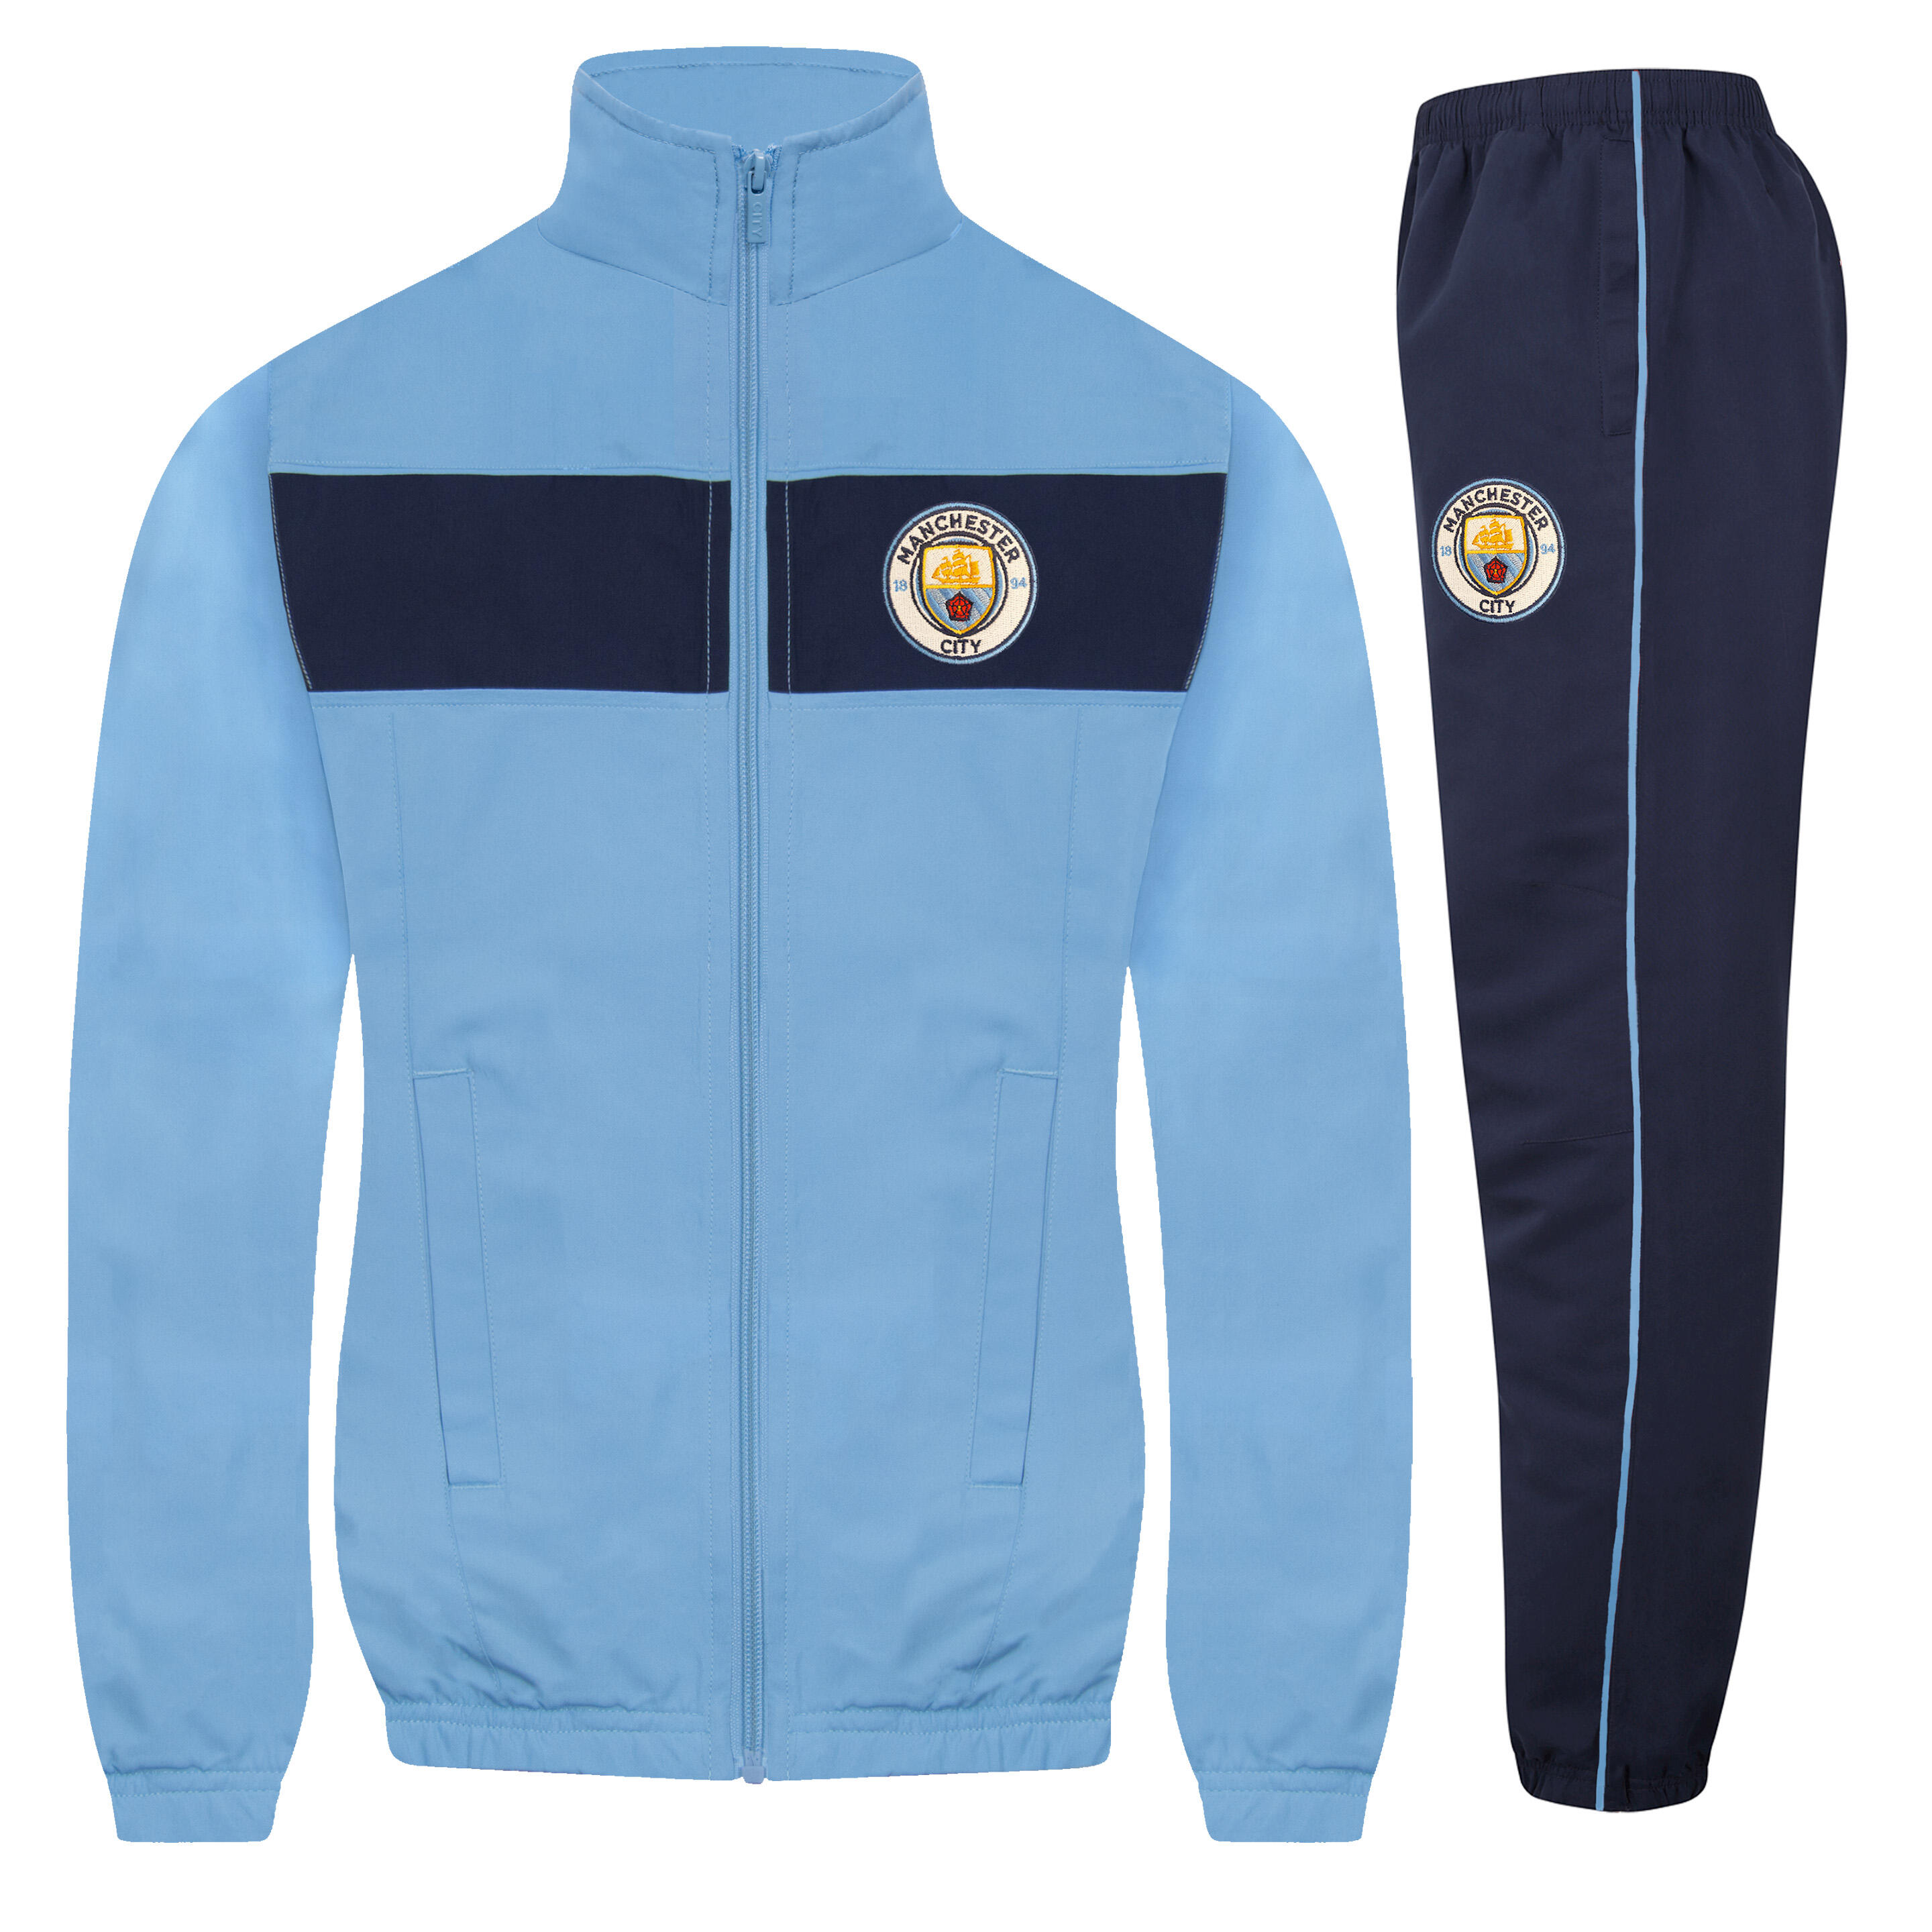 MANCHESTER CITY Manchester City Boys Tracksuit Jacket & Pants Set Kids OFFICIAL Football Gift